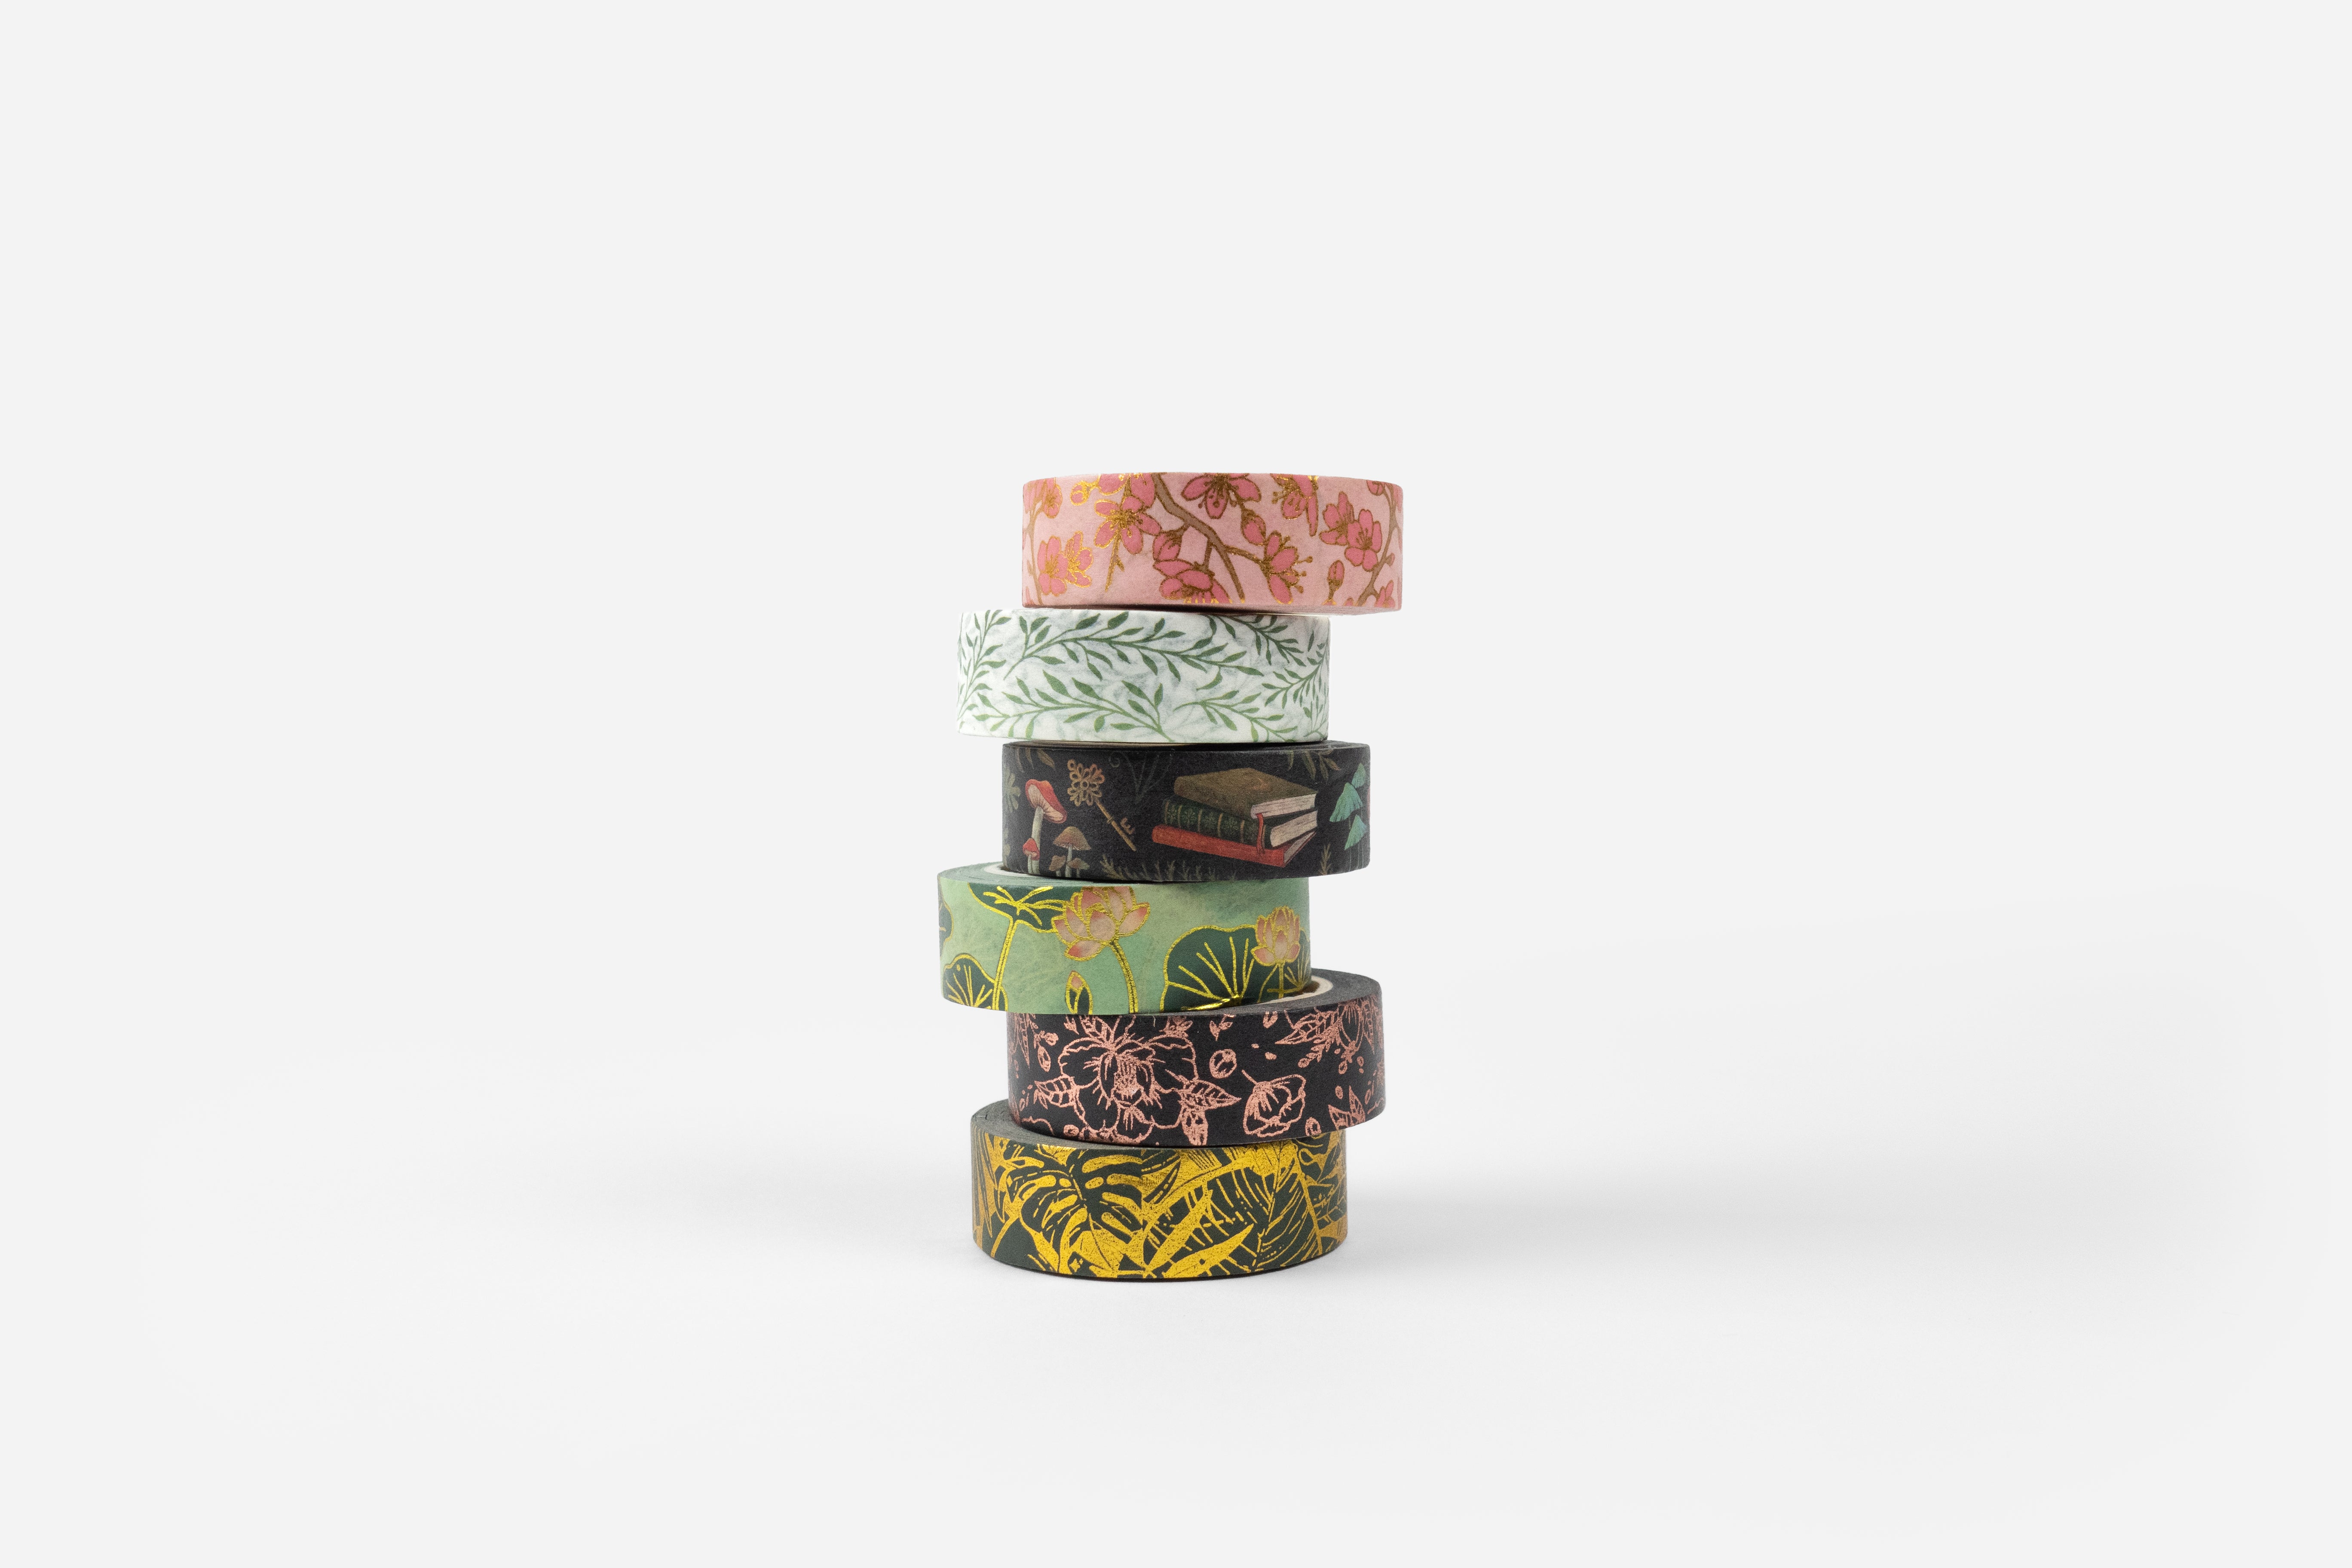 six washi tape golden nature rolls stacked